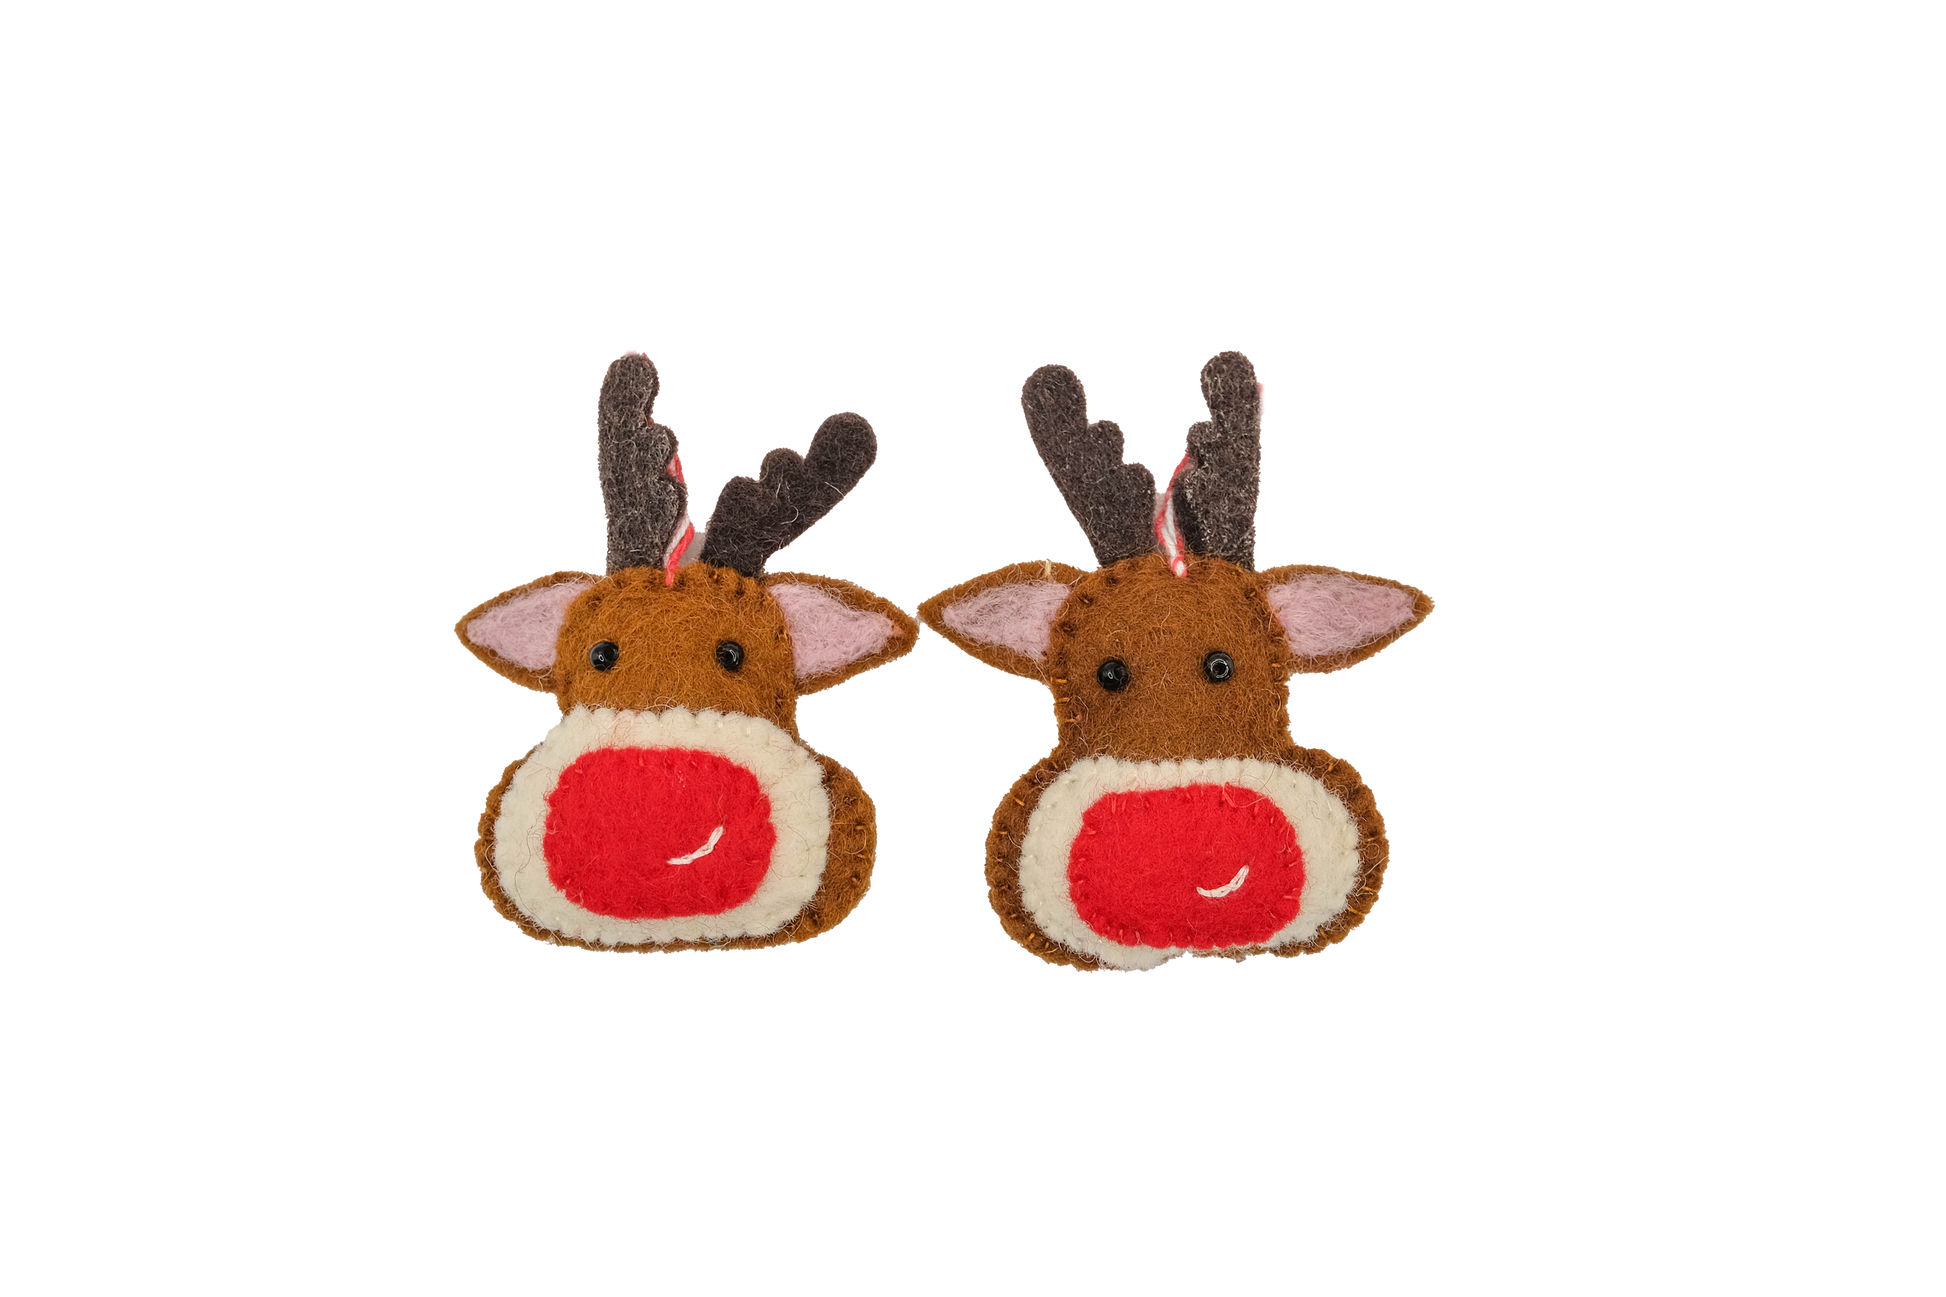 This Global Groove Life, handmade, ethical, fair trade, eco-friendly, sustainable, felt Rudolph Reindeer ornament set was created by artisans in Kathmandu Nepal and will bring colorful warmth and fun to your Christmas tree this season.